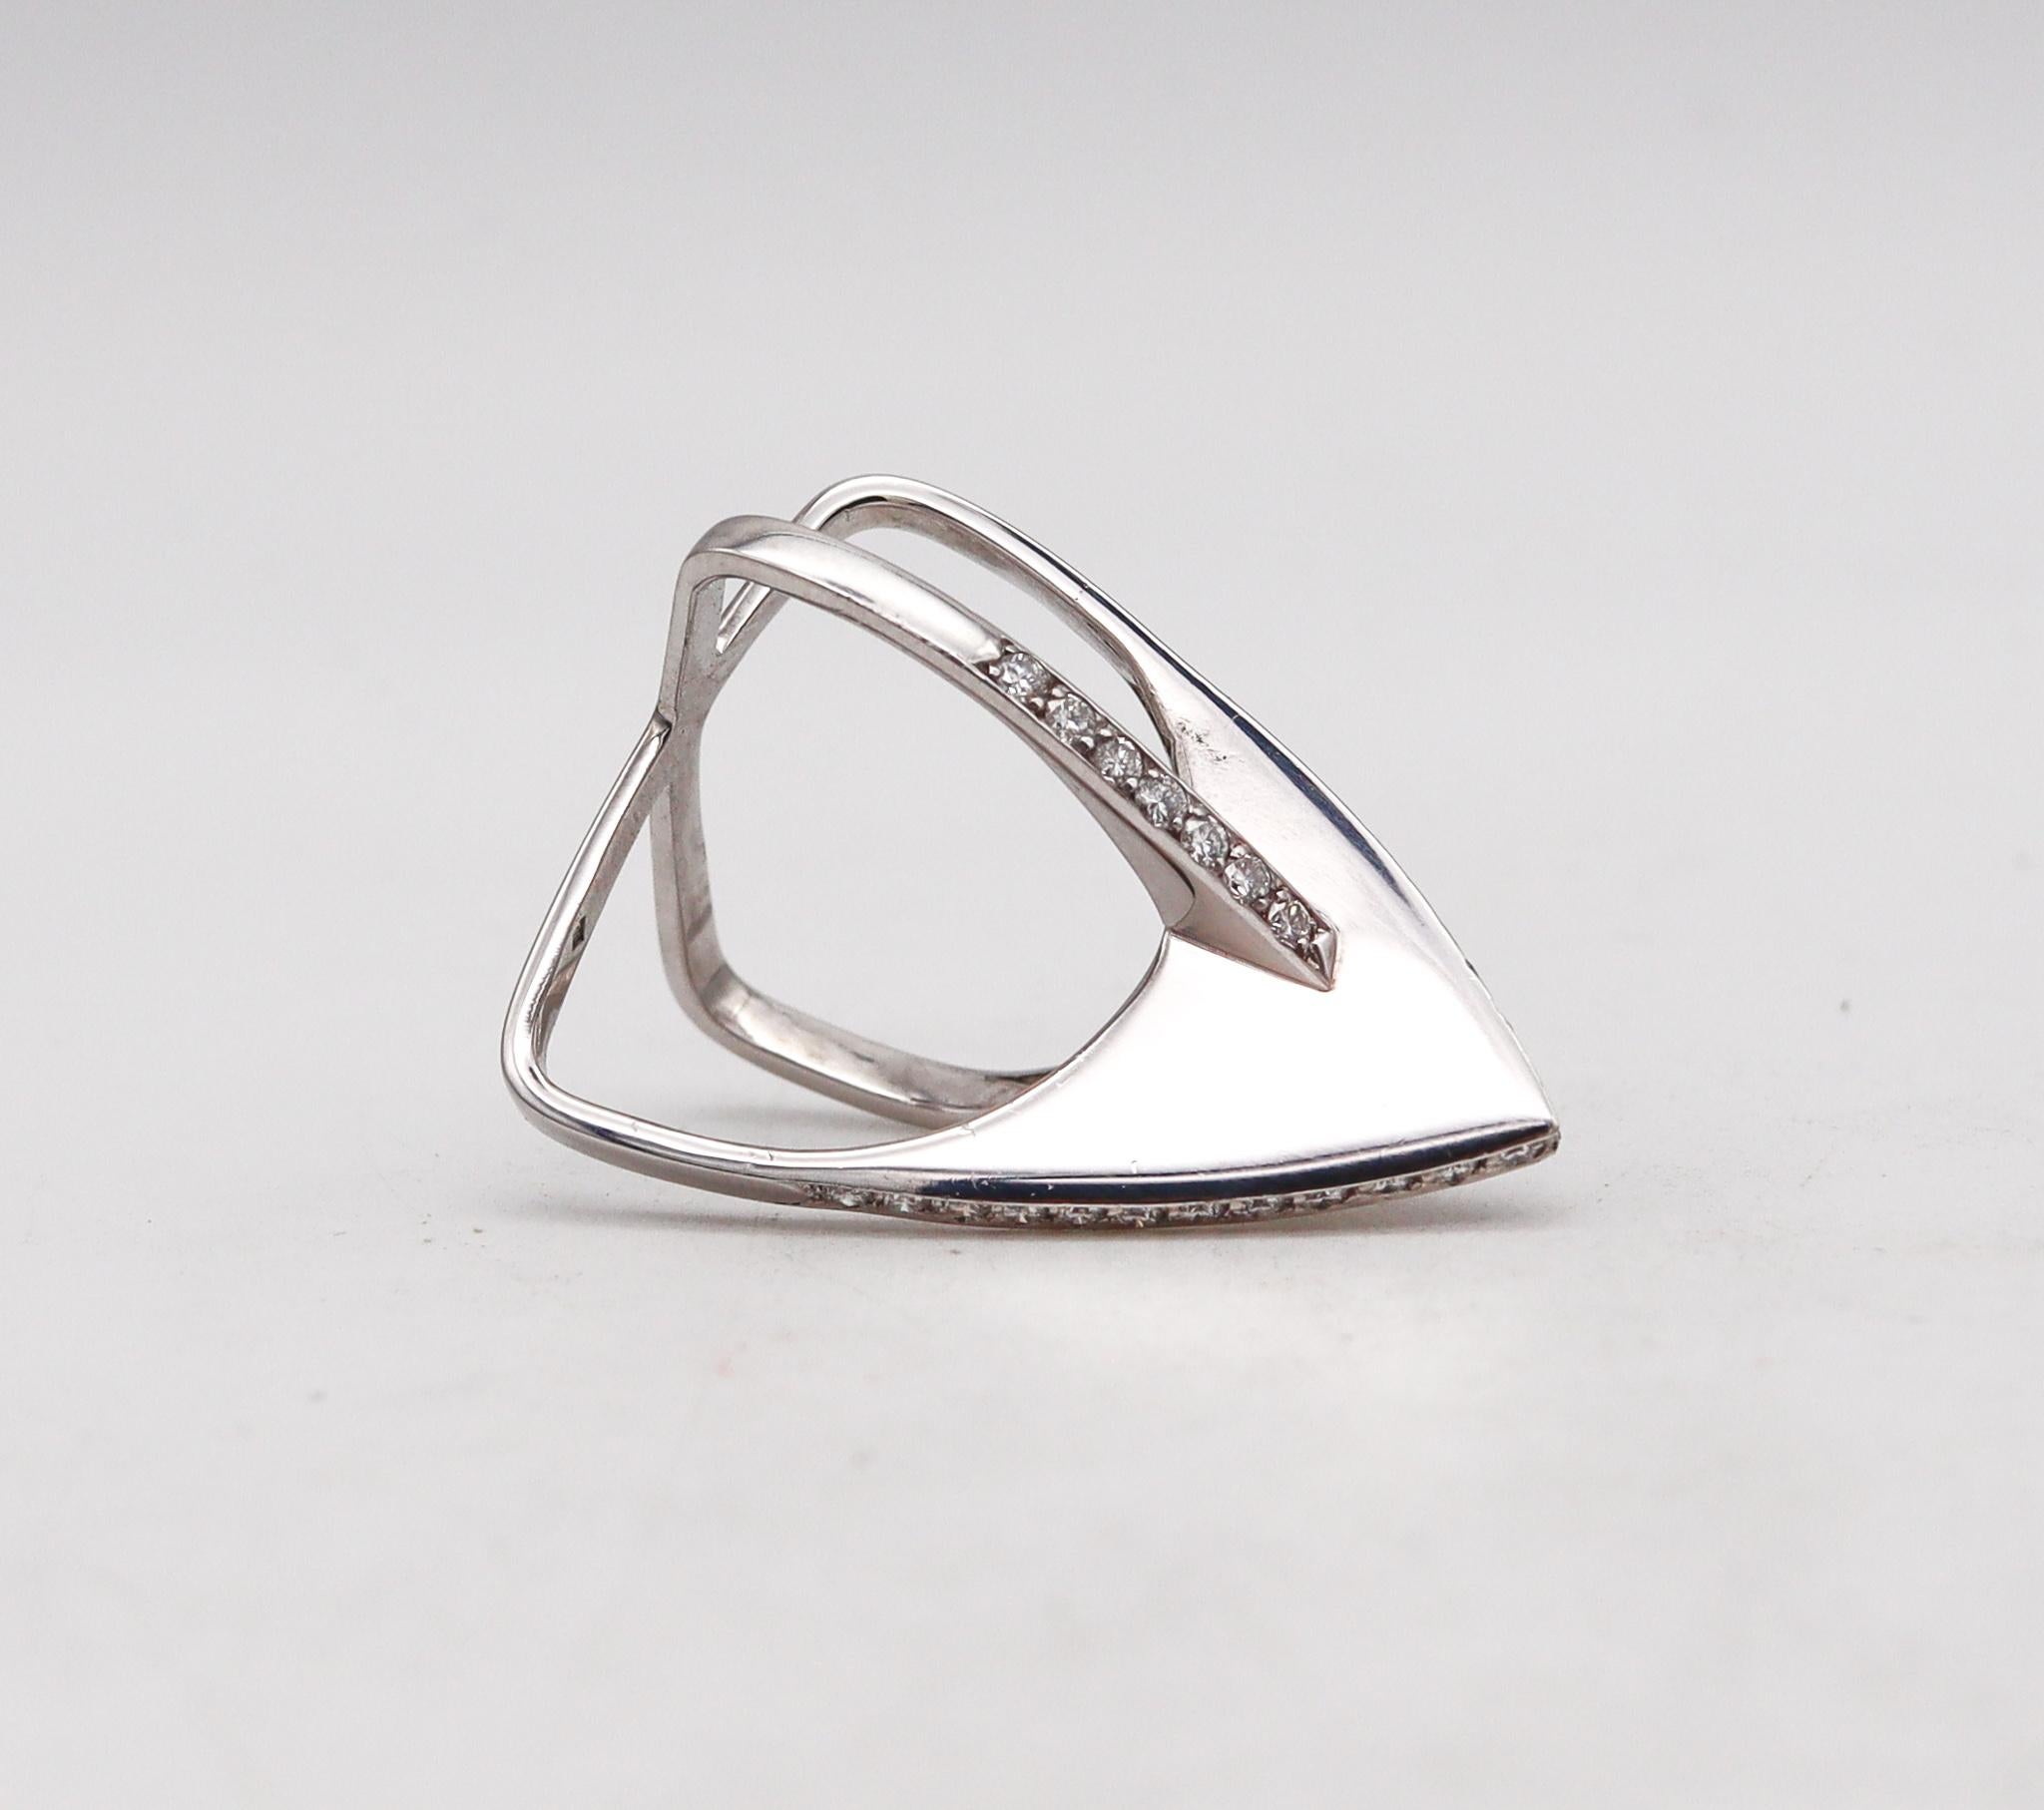 Modernist H. Stern Architectural Geometric Cocktail Ring 18Kt White Gold 1.05 Cts Diamonds For Sale